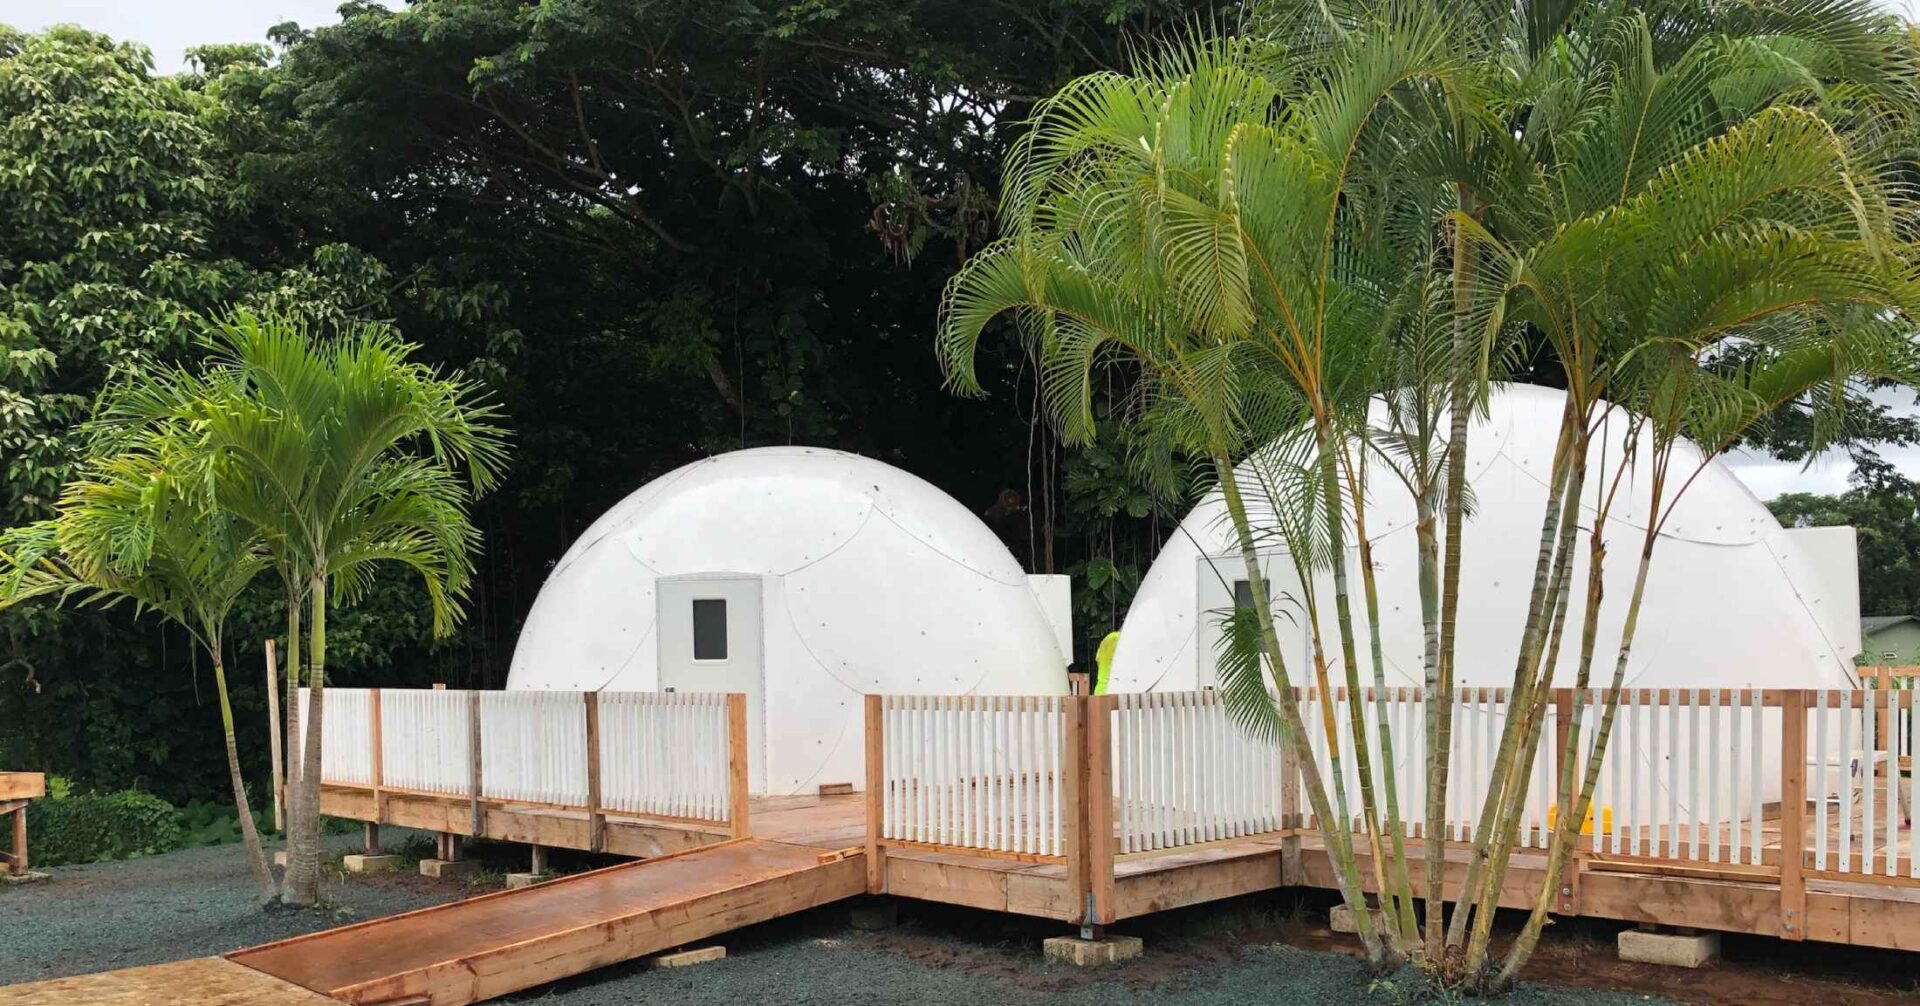 Two domes and trees outside